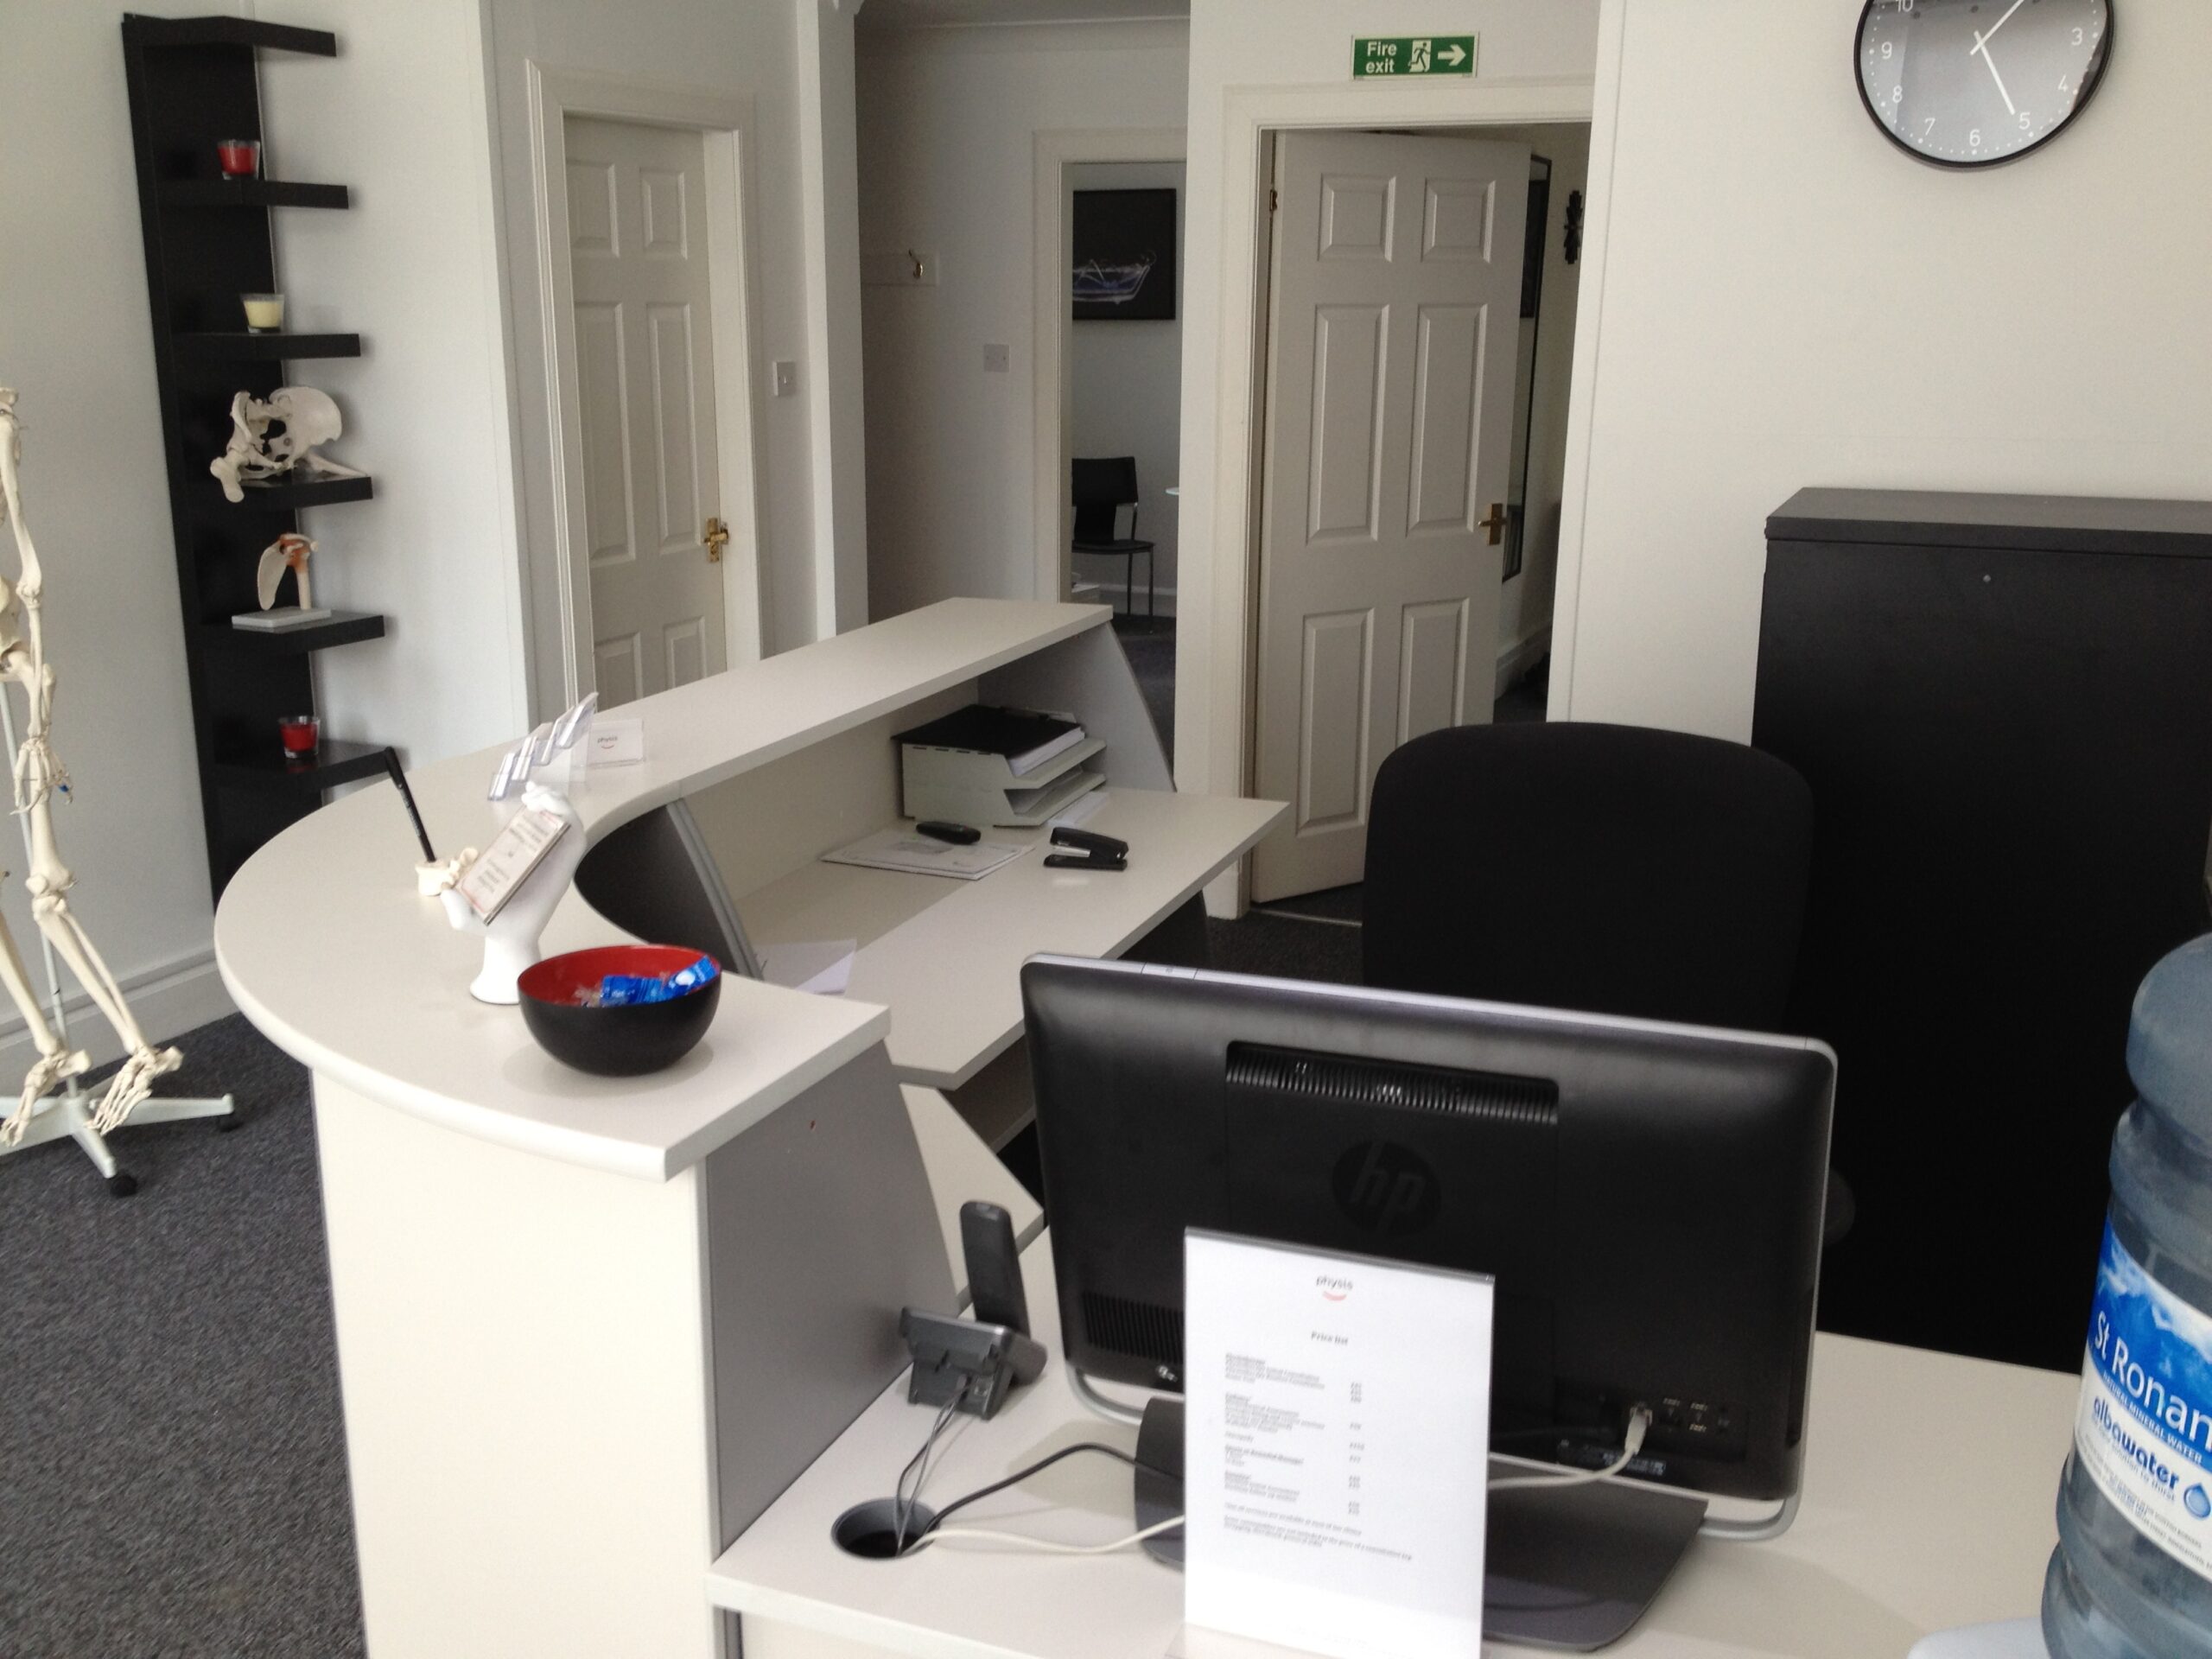 Reception area at Physis Physiotherapy in Edinburgh